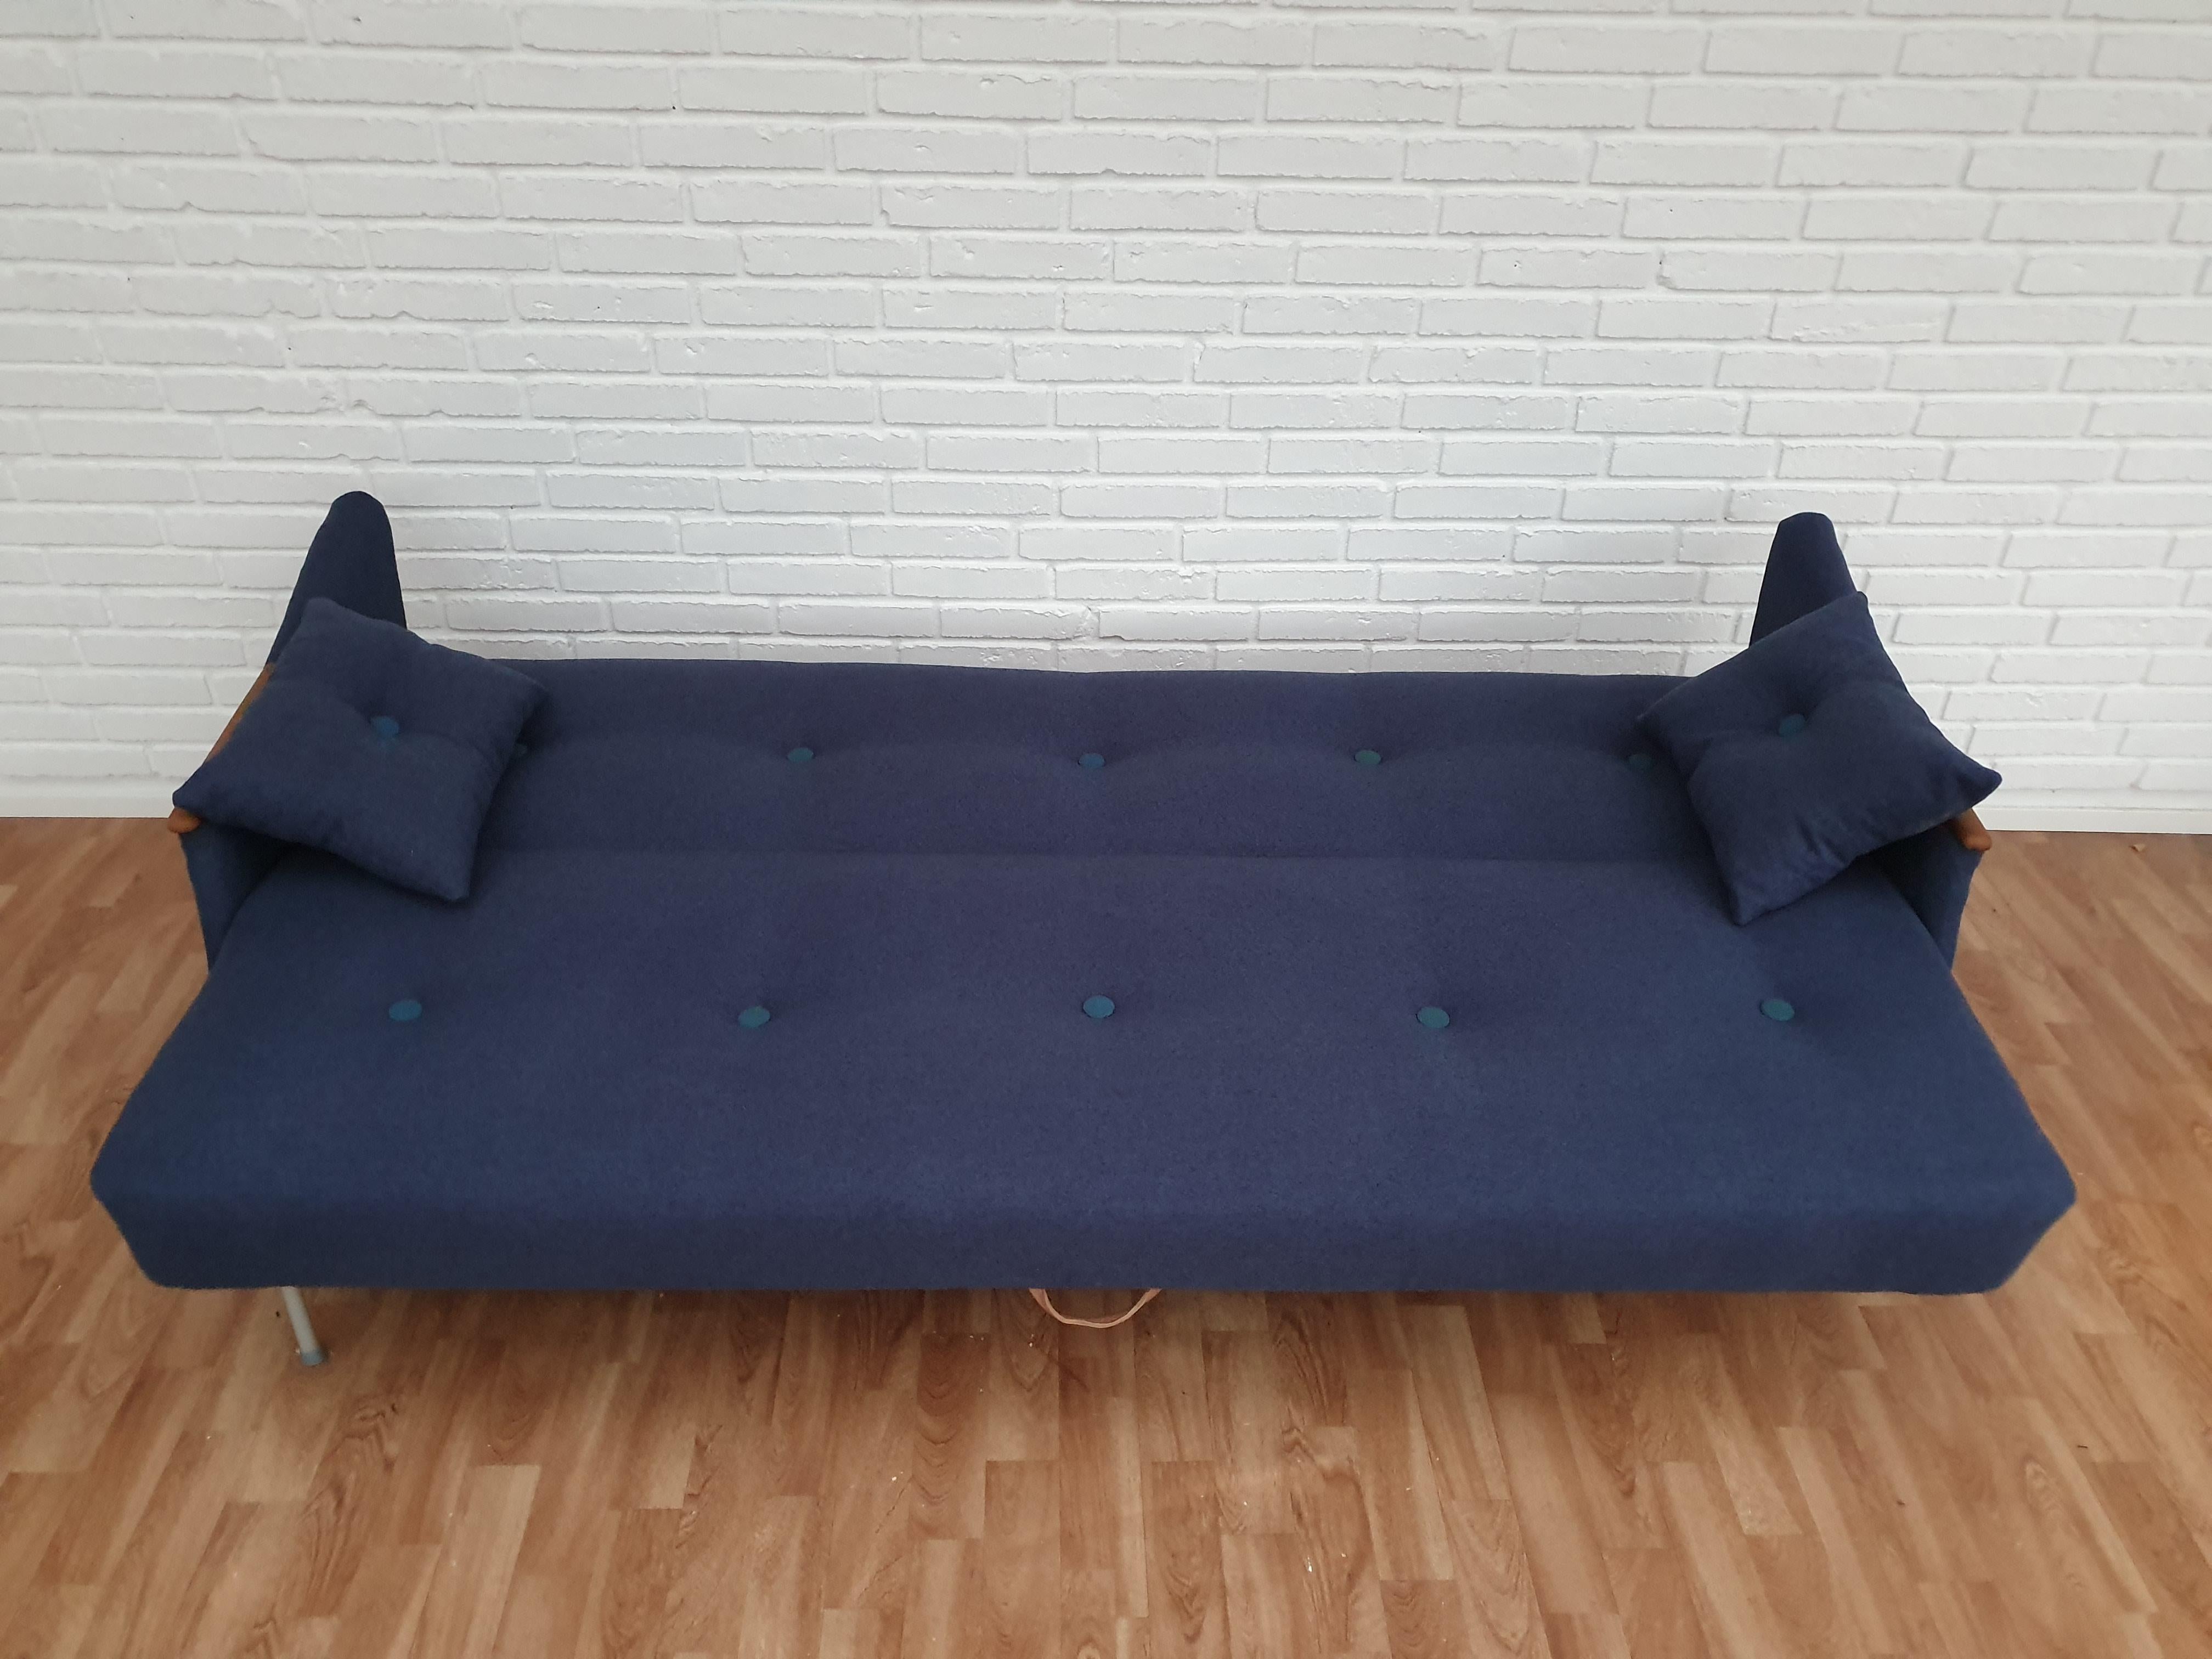 Danish Designed, 3 Persons Sofa Bed, 1960s, Completely Restored im Angebot 4